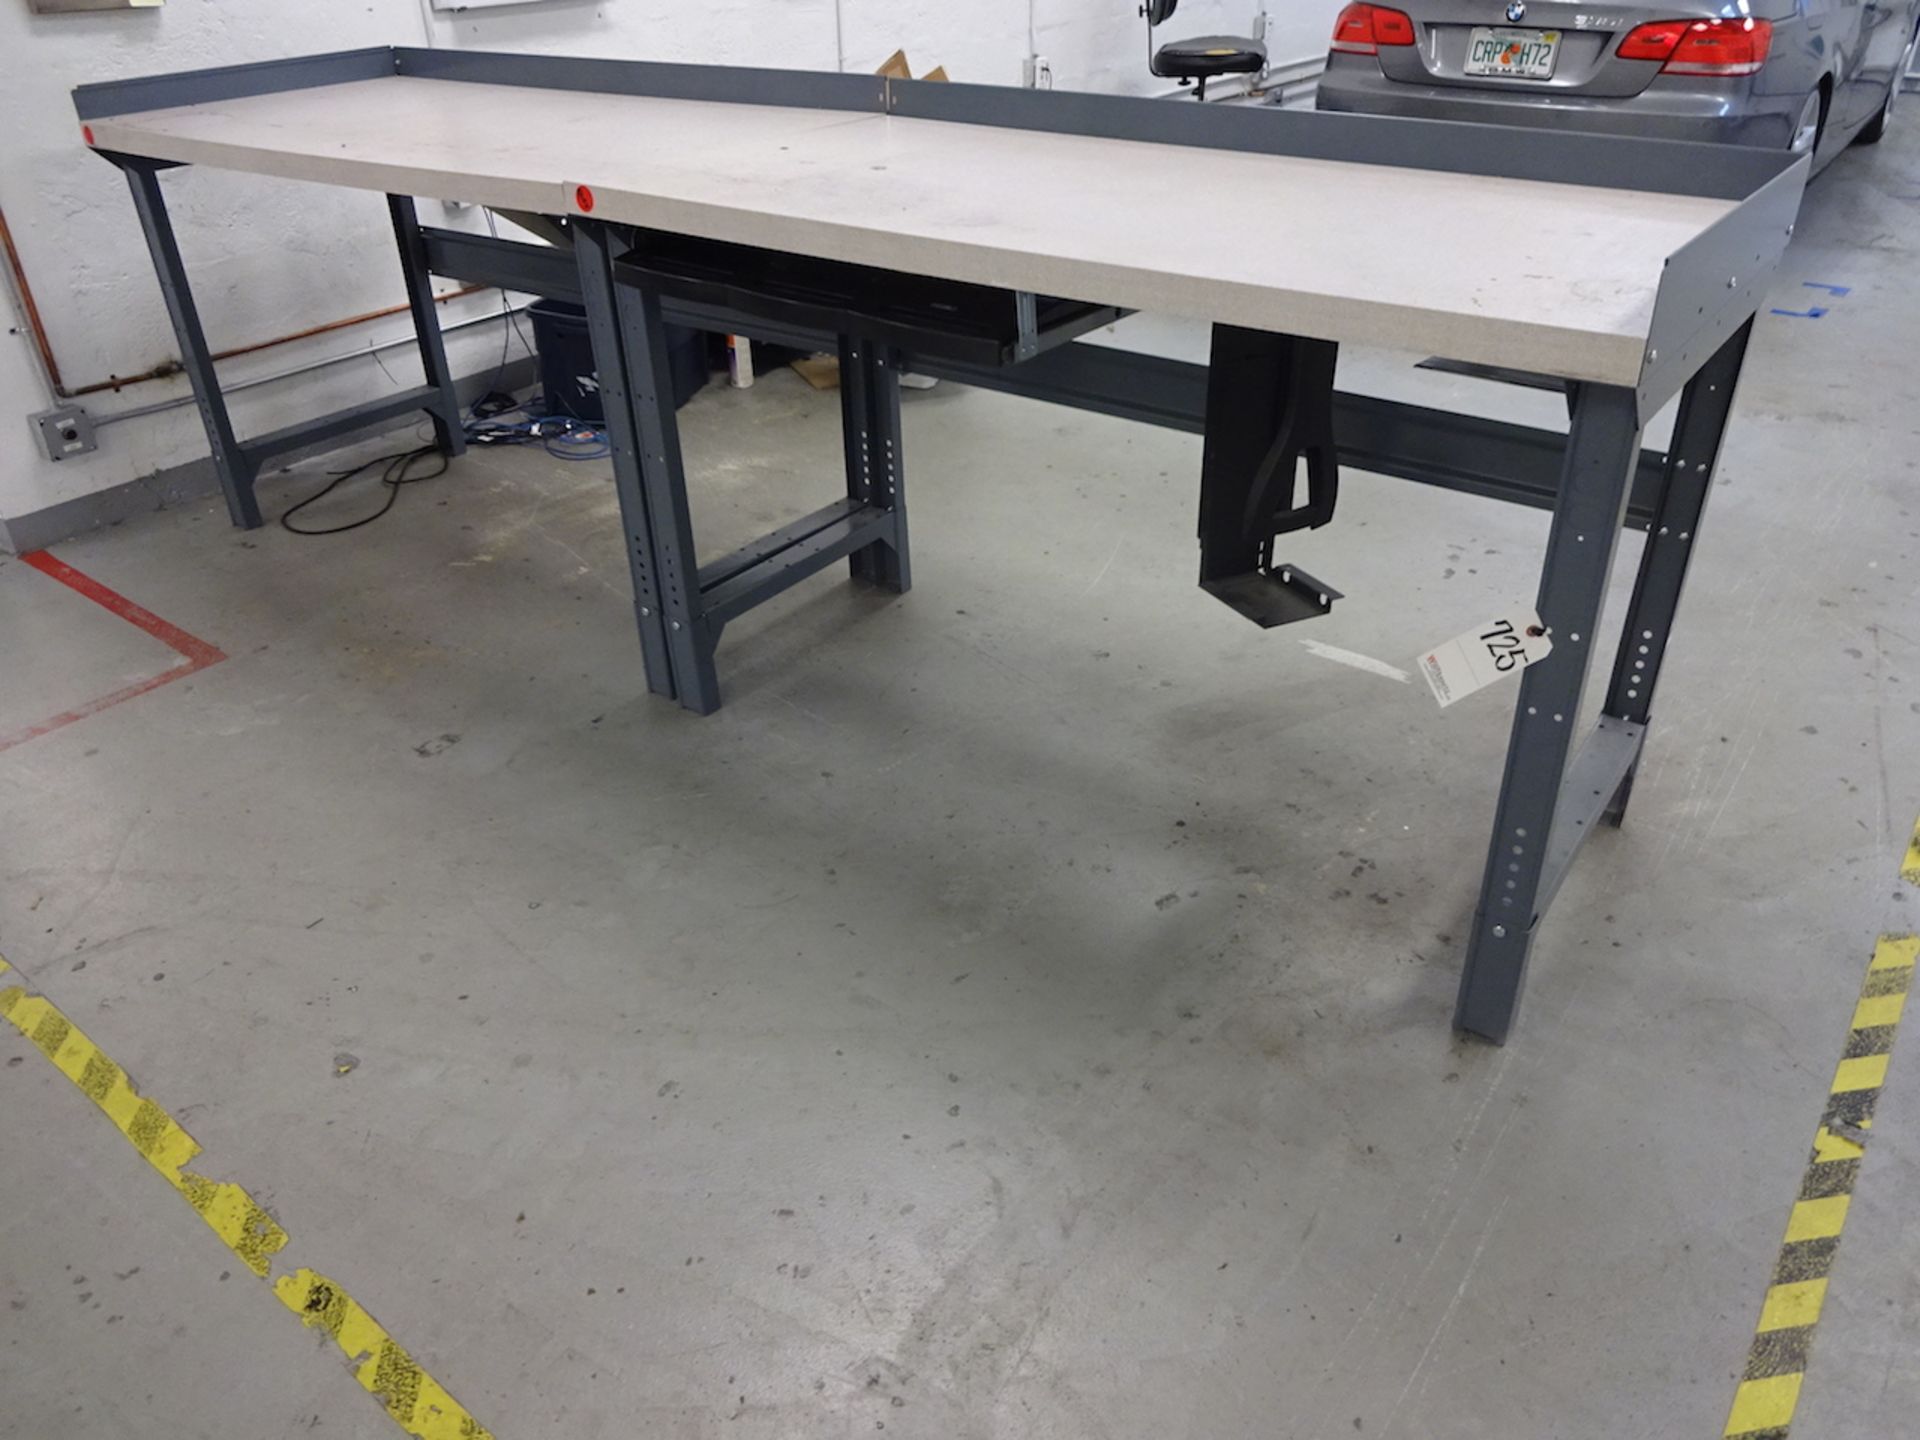 LOT: (2) 30" X 60" (APPROX.) STEEL WORK BENCHES; Wood Top